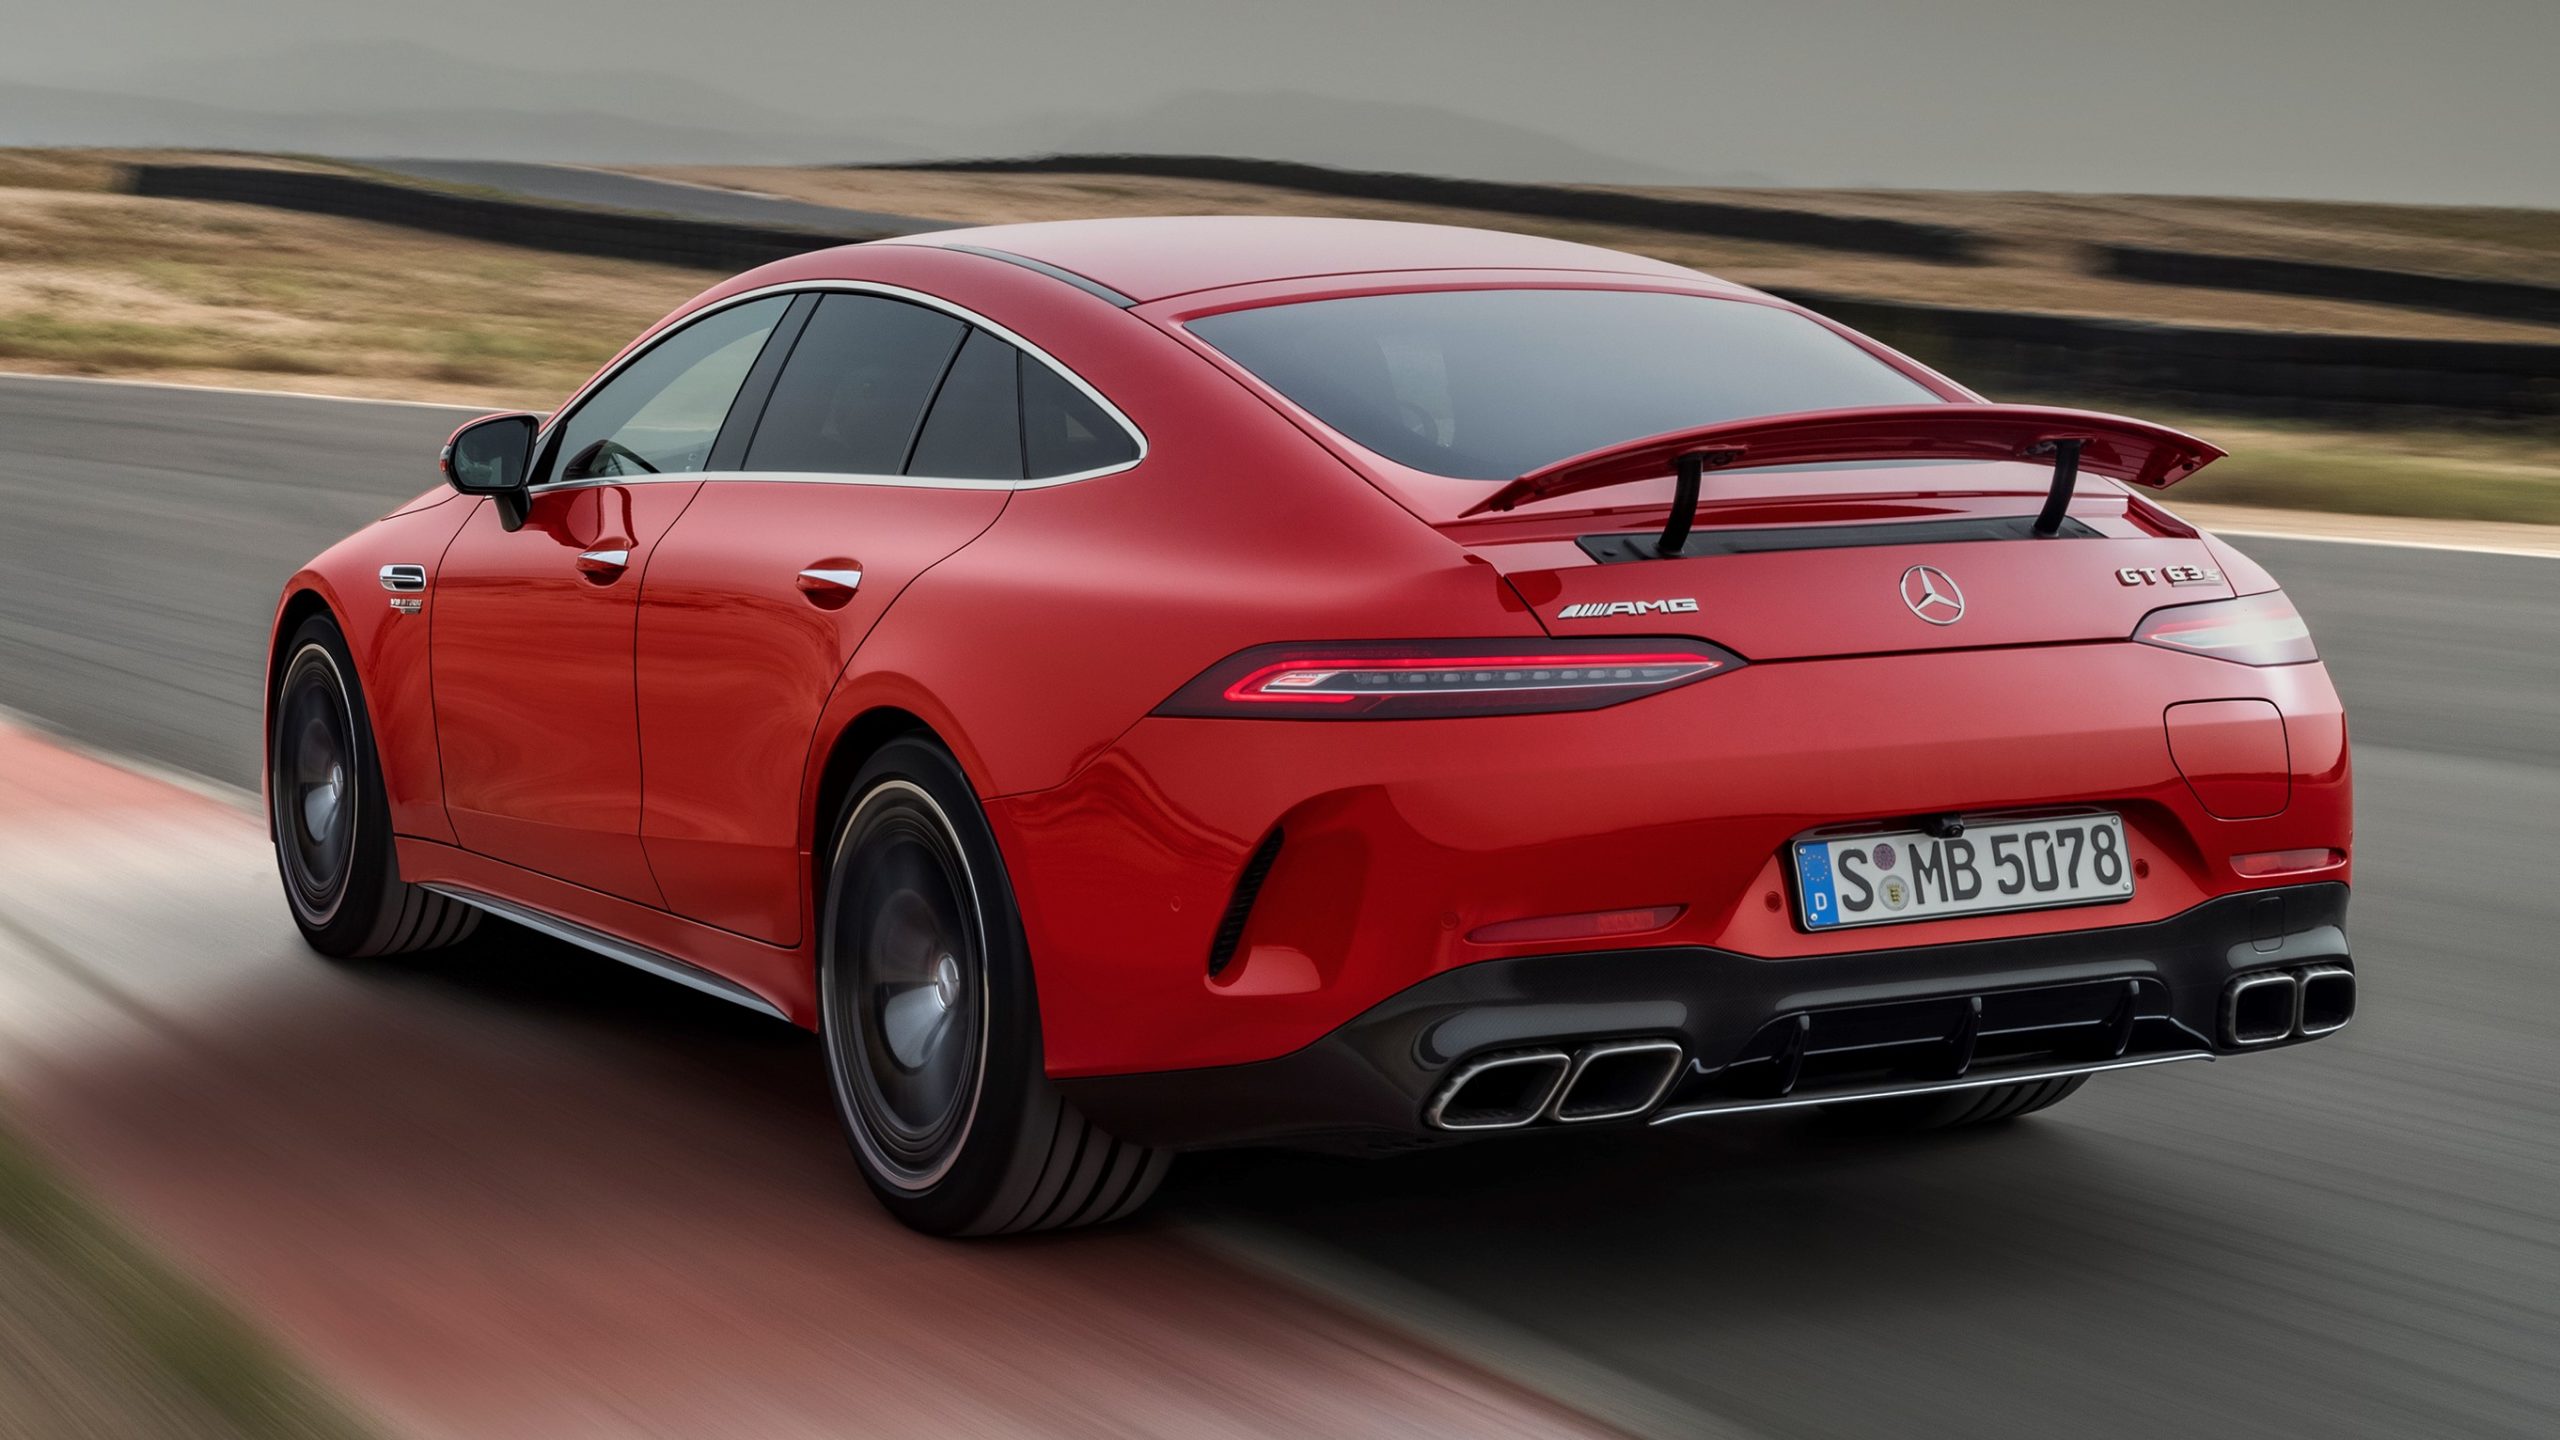 mercedes-amg, mercedes-amg gt 63 s e performance, mercedes-benz, pricing revealed for new mercedes-amg gt63 s e performance – the most expensive amg in south africa